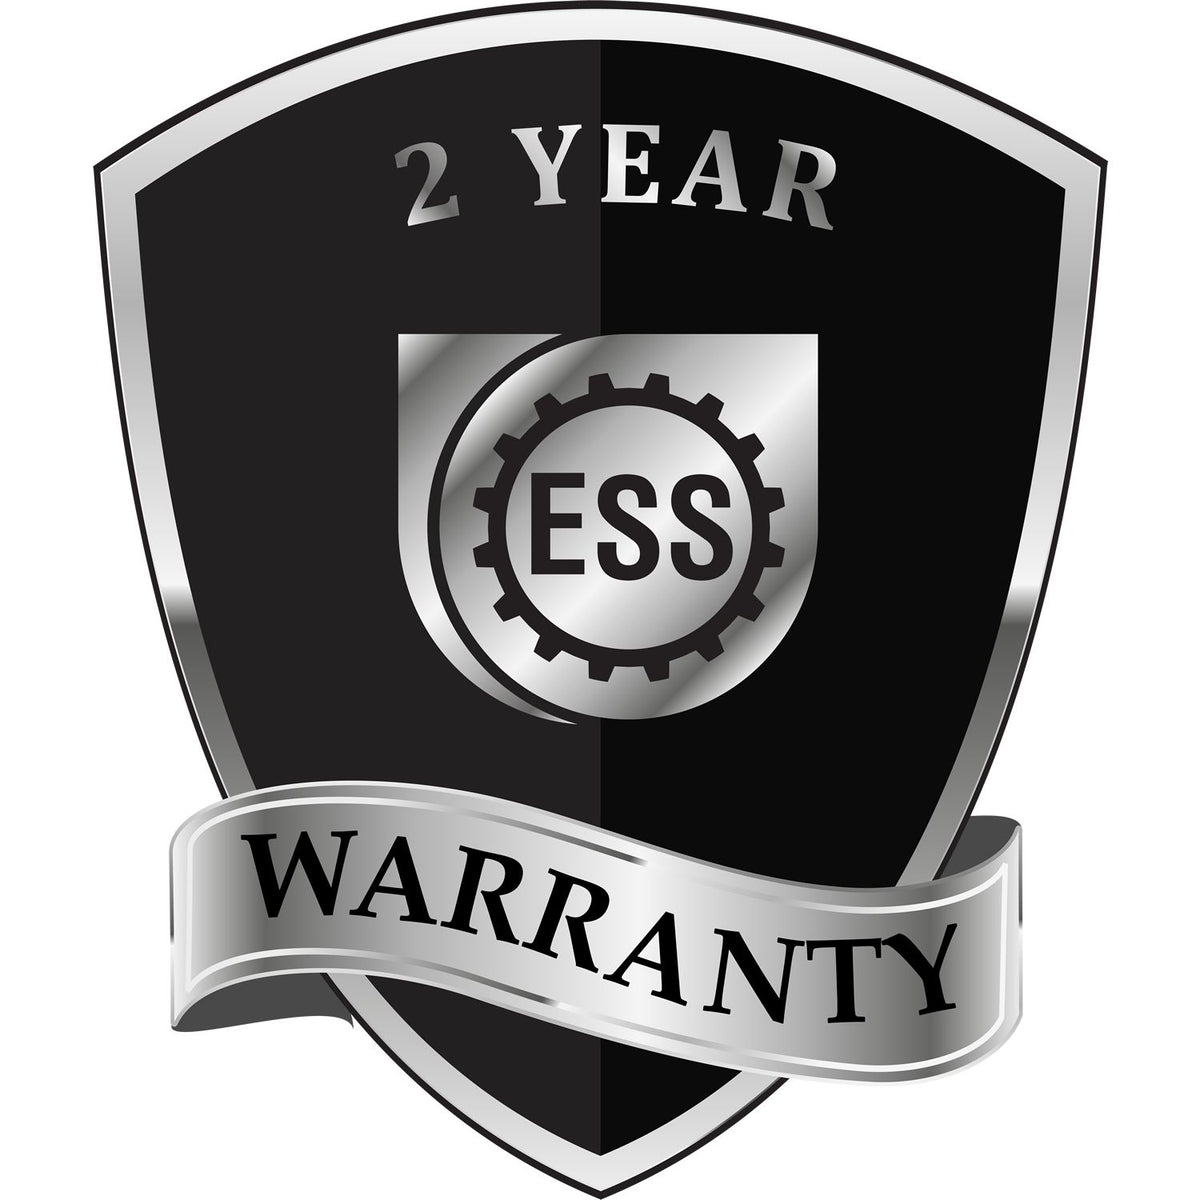 A black and silver badge or emblem showing warranty information for the Hybrid Montana Geologist Seal